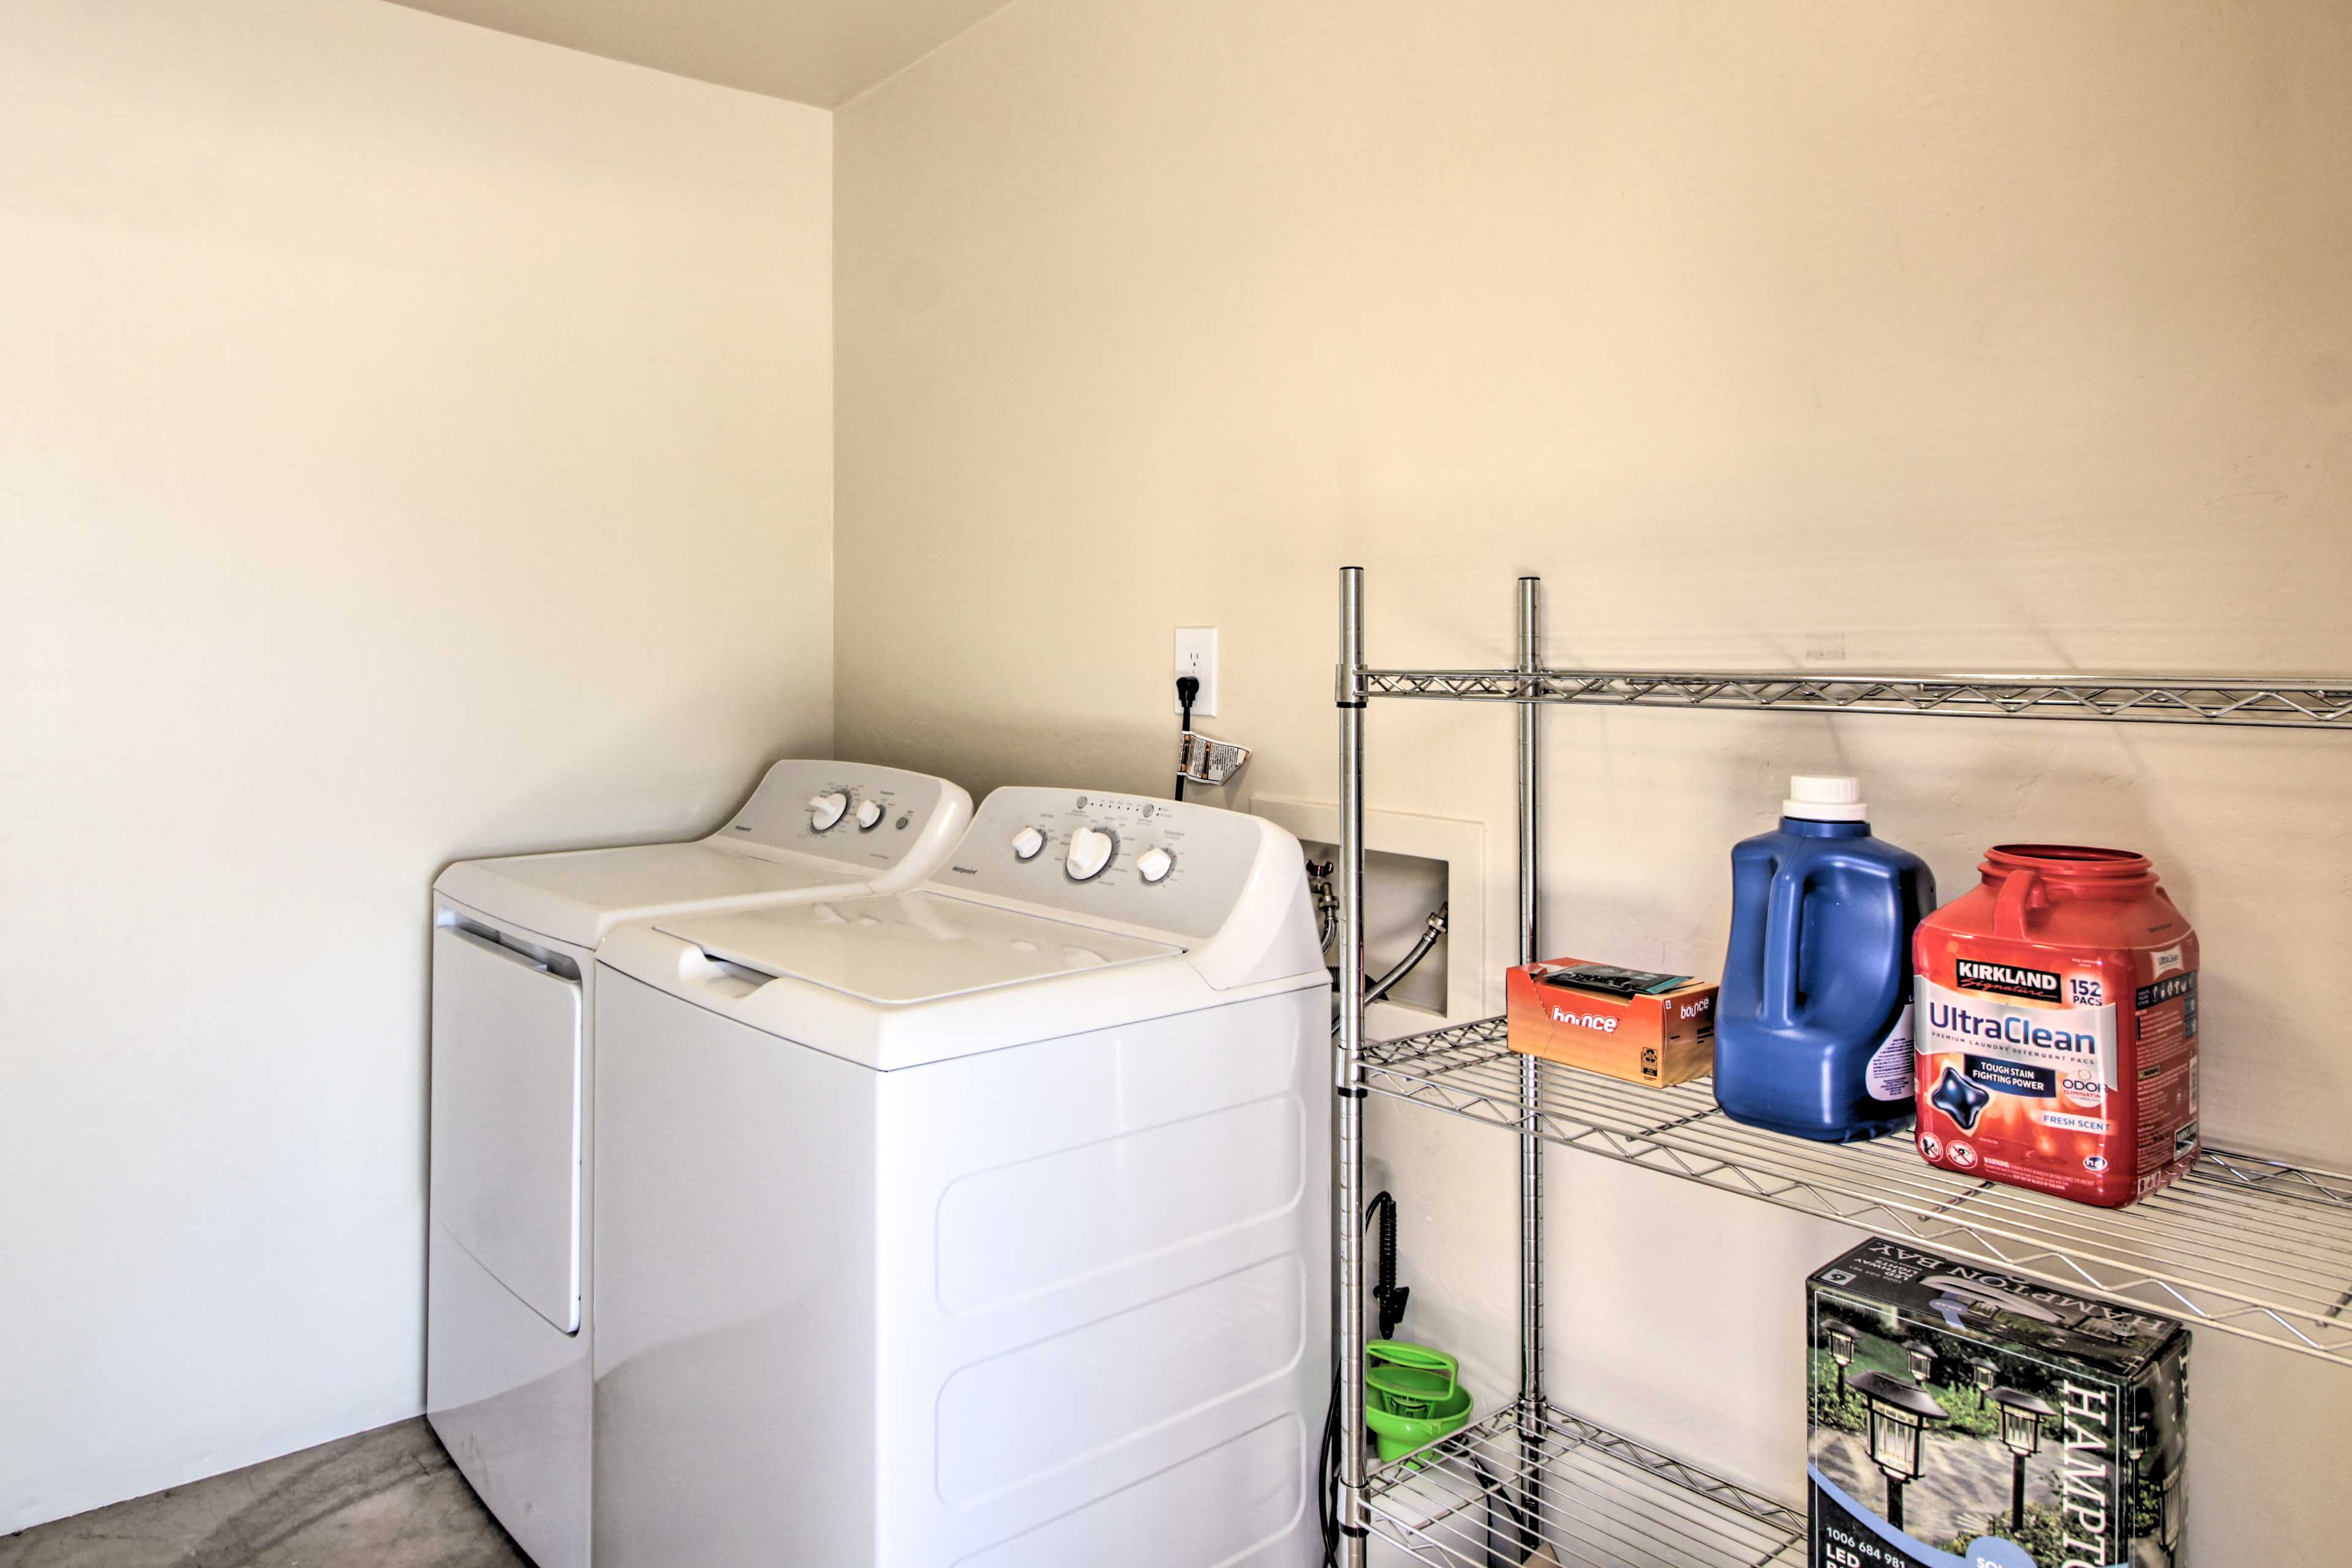 At-Home Laundry | Washer + Dryer | Laundry Detergent